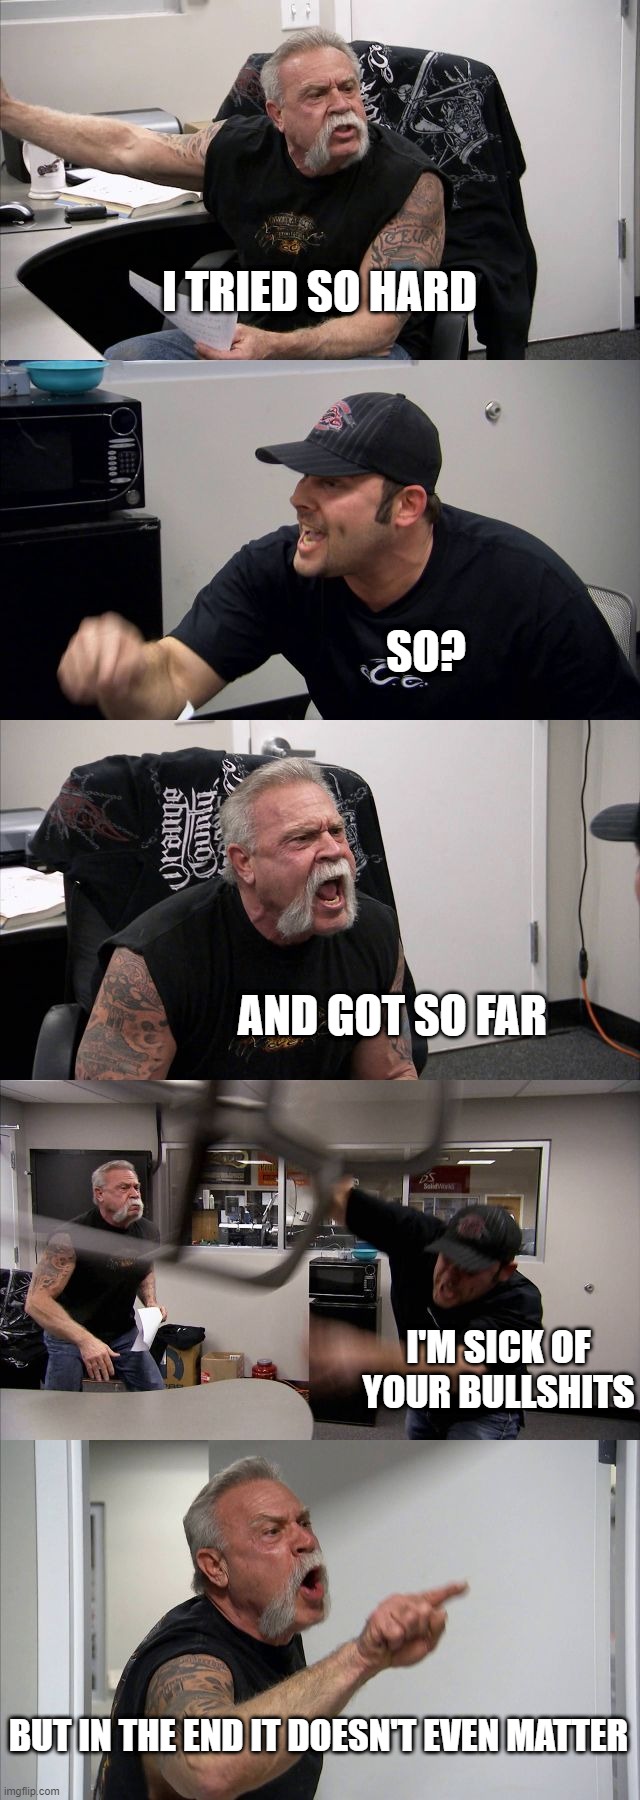 American Chopper Argument Meme | I TRIED SO HARD; SO? AND GOT SO FAR; I'M SICK OF YOUR BULLSHITS; BUT IN THE END IT DOESN'T EVEN MATTER | image tagged in memes,american chopper argument | made w/ Imgflip meme maker